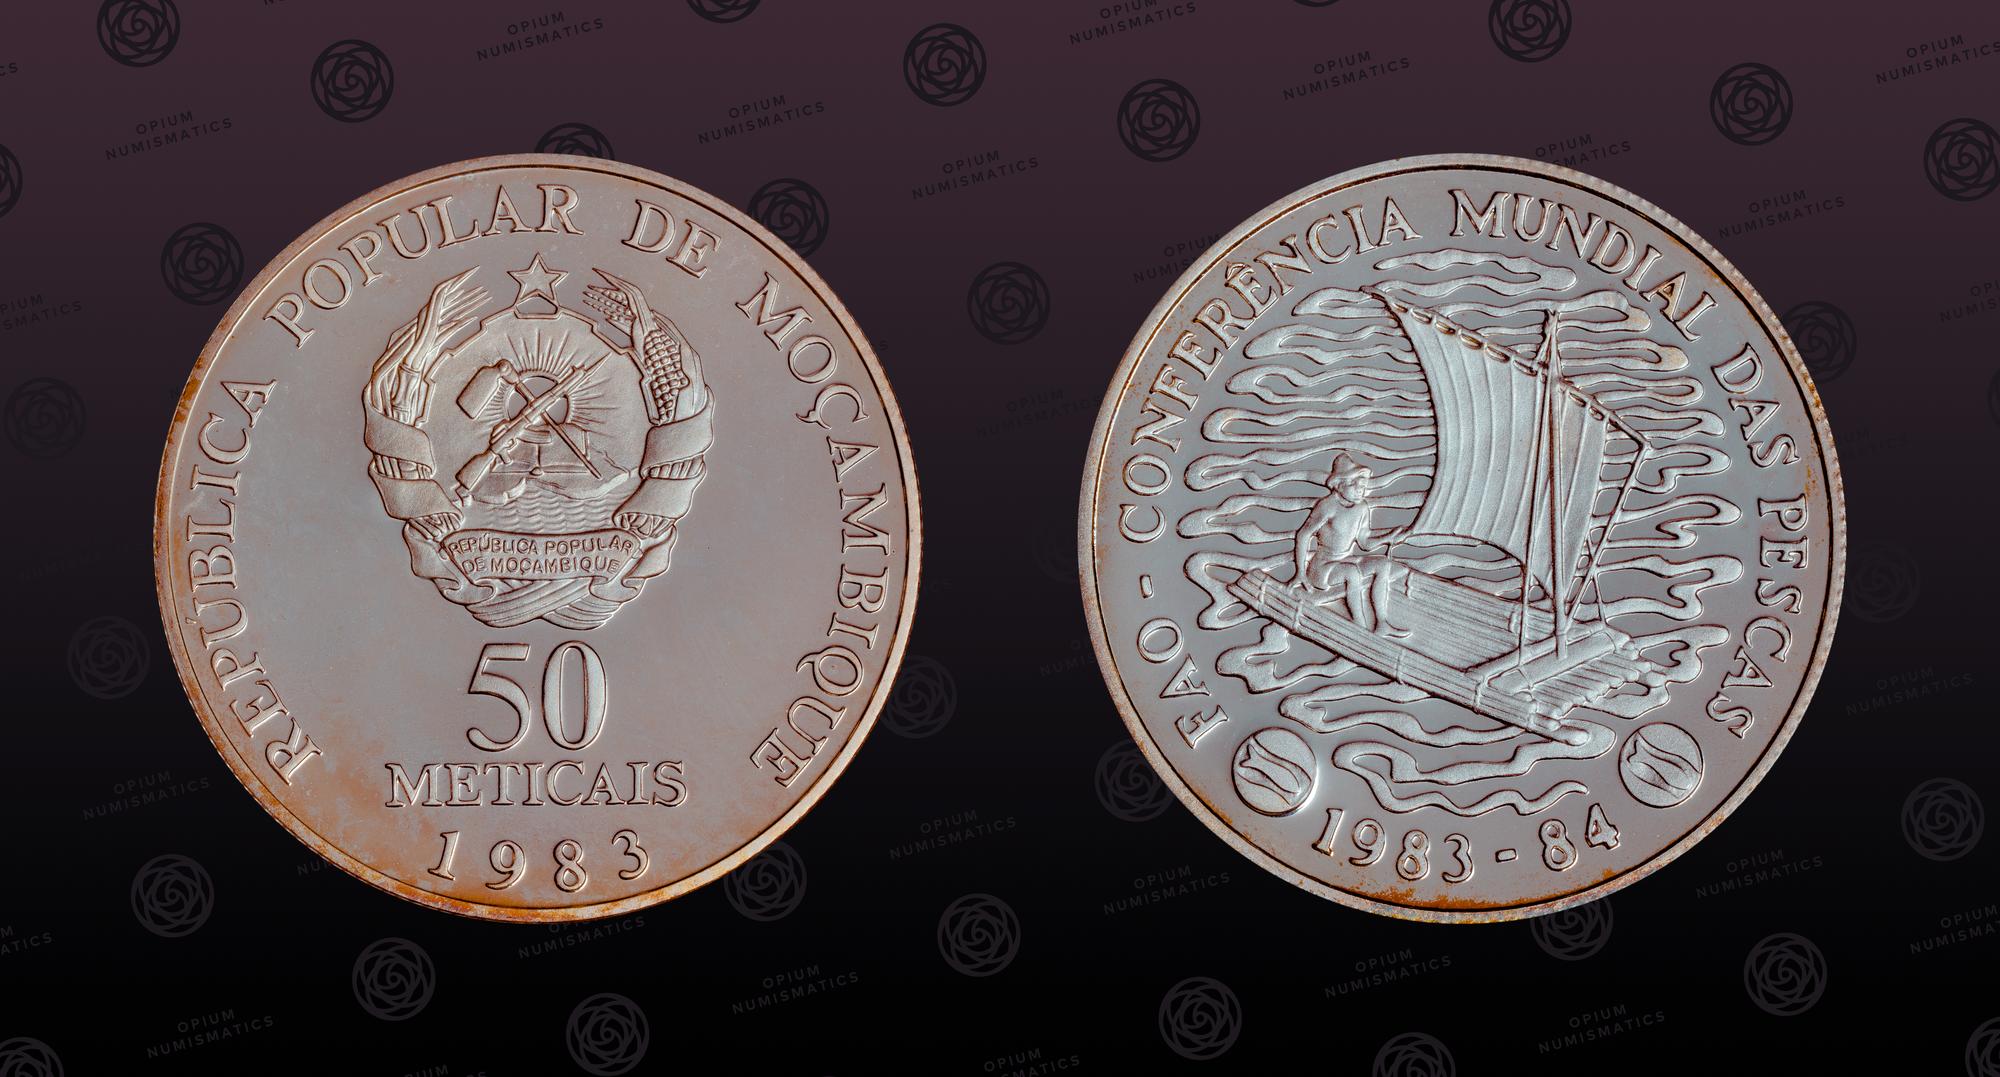 Details about   Mozambique 1983 Fisheries Conference 50 Meticais Silver Coin,Proof 